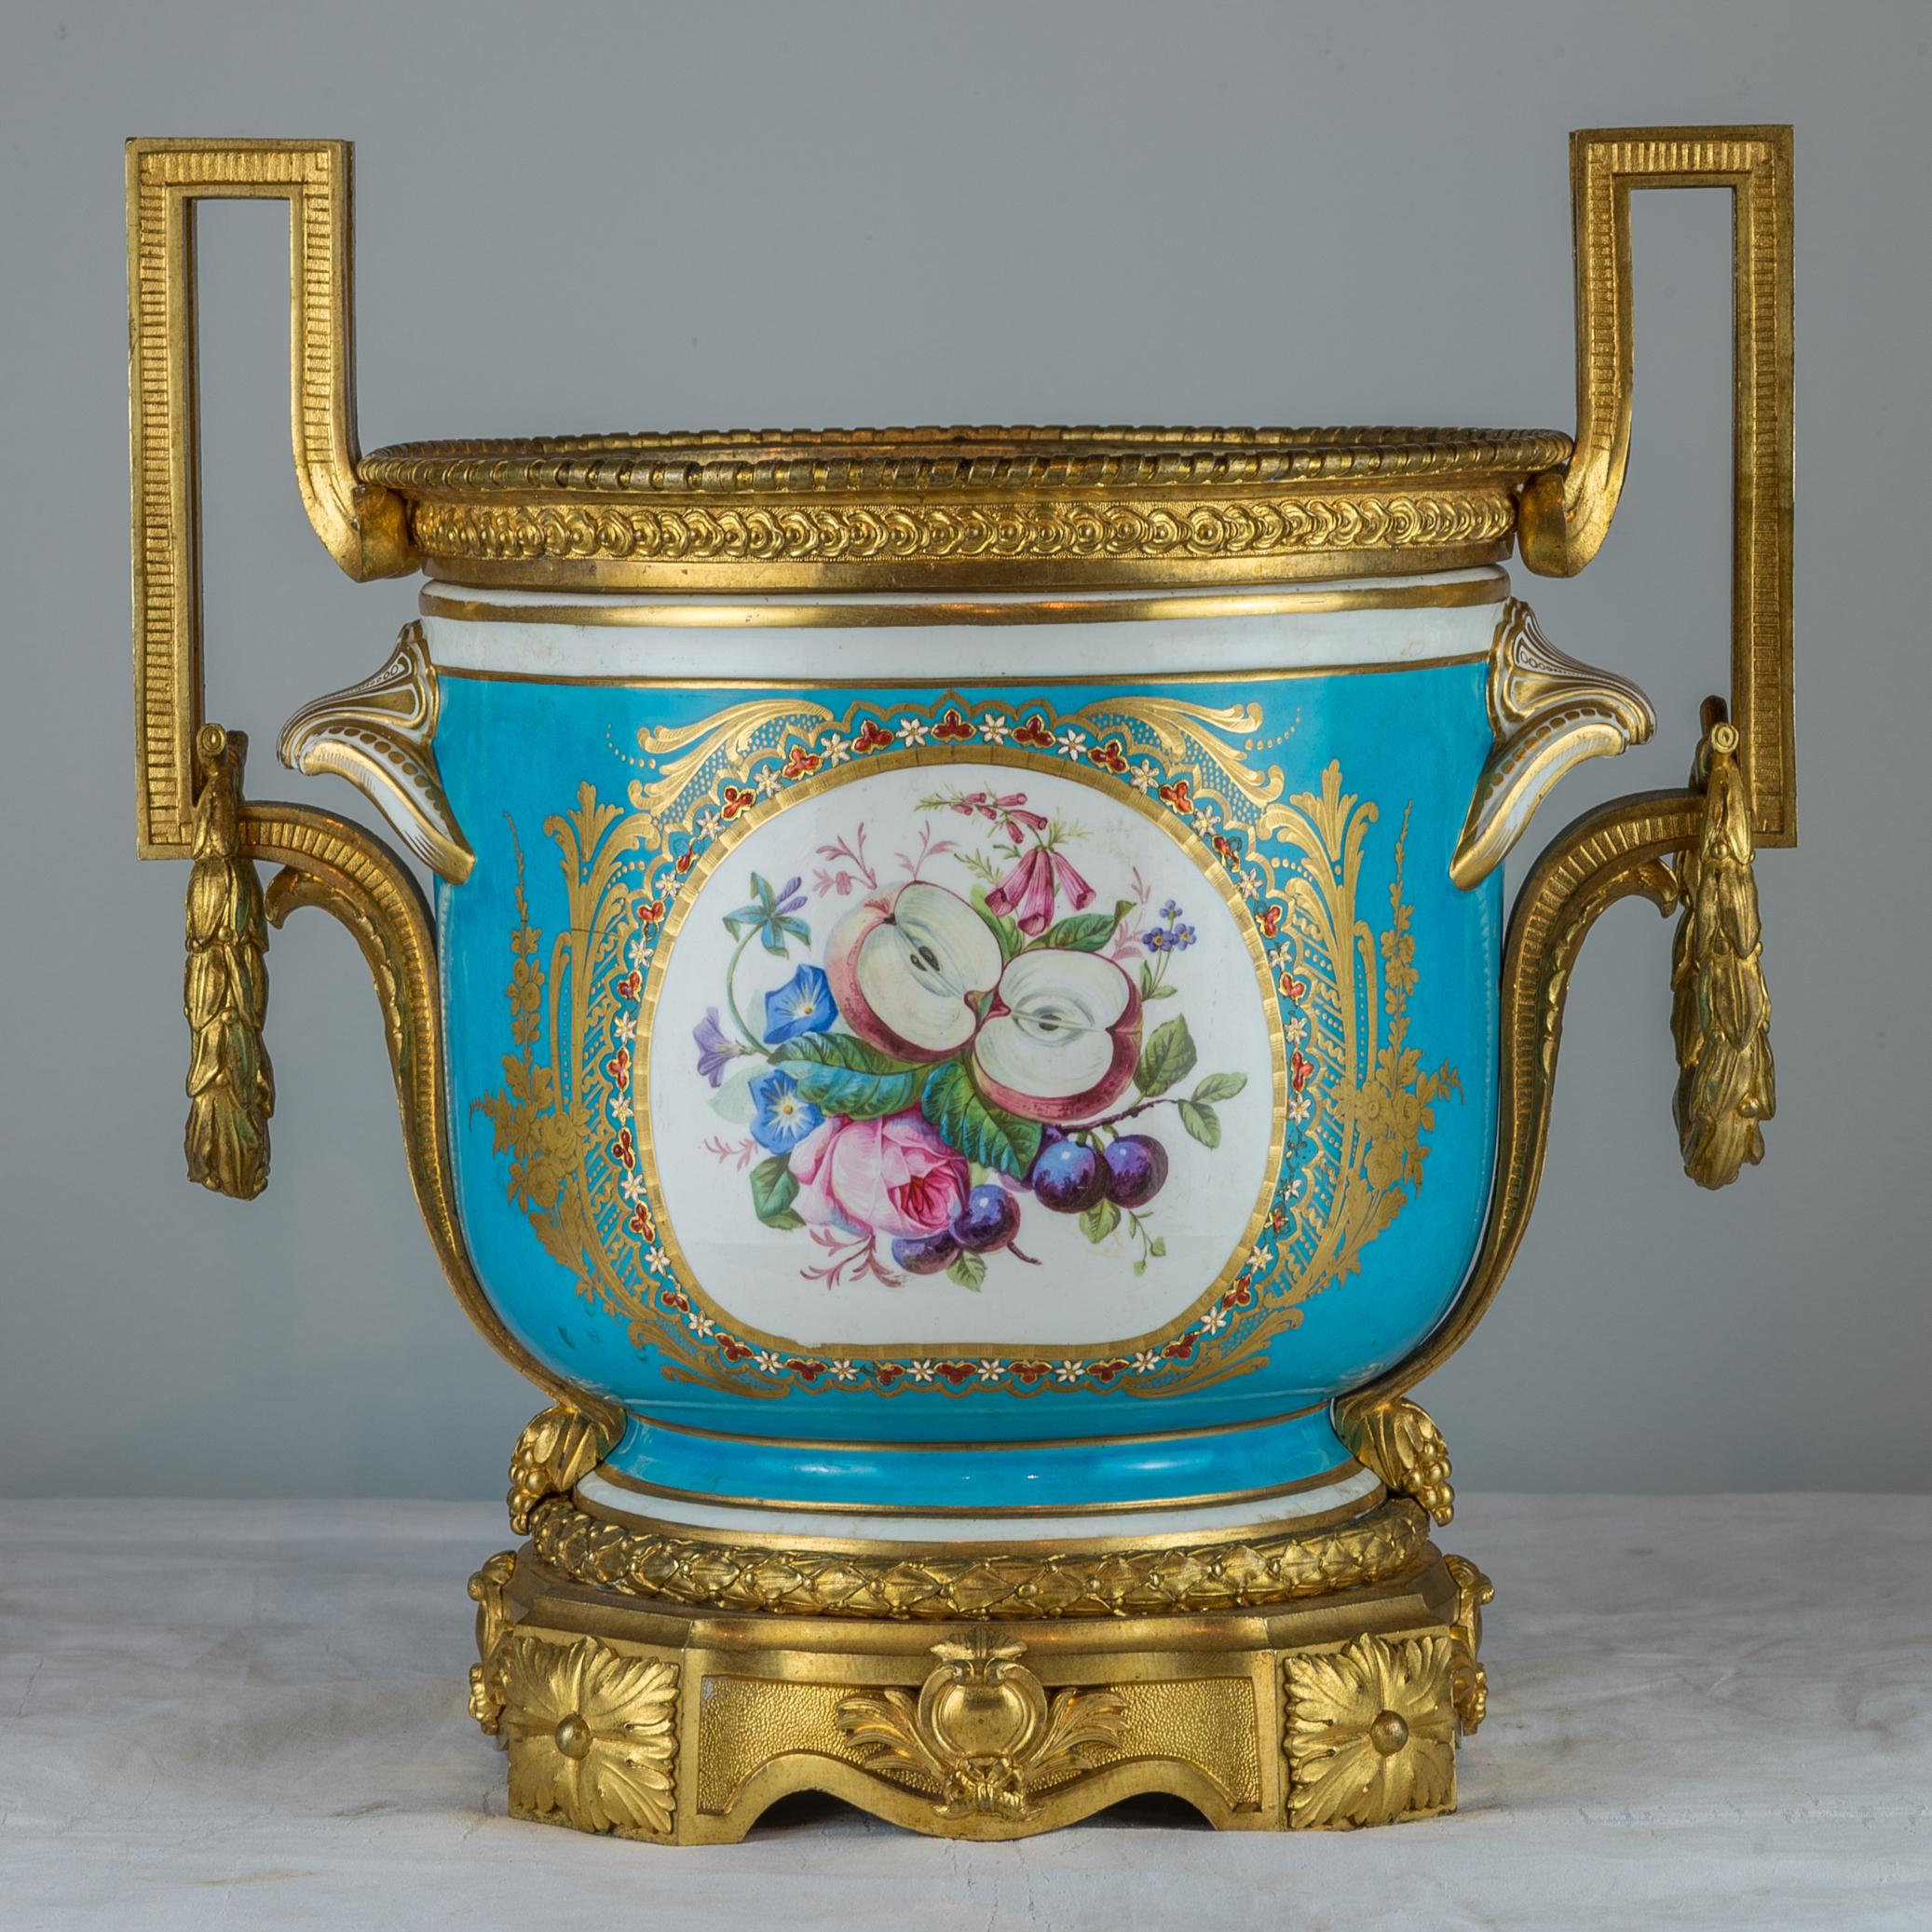 A pair of exquisite gilt bronze mounted turquoise ground Sèvres style jardinières. Finely hand painted lovers scene and beaded. 

Origin: French
Date: 19th century
Dimension: 13 1/4 x 13 x 9 1/2.